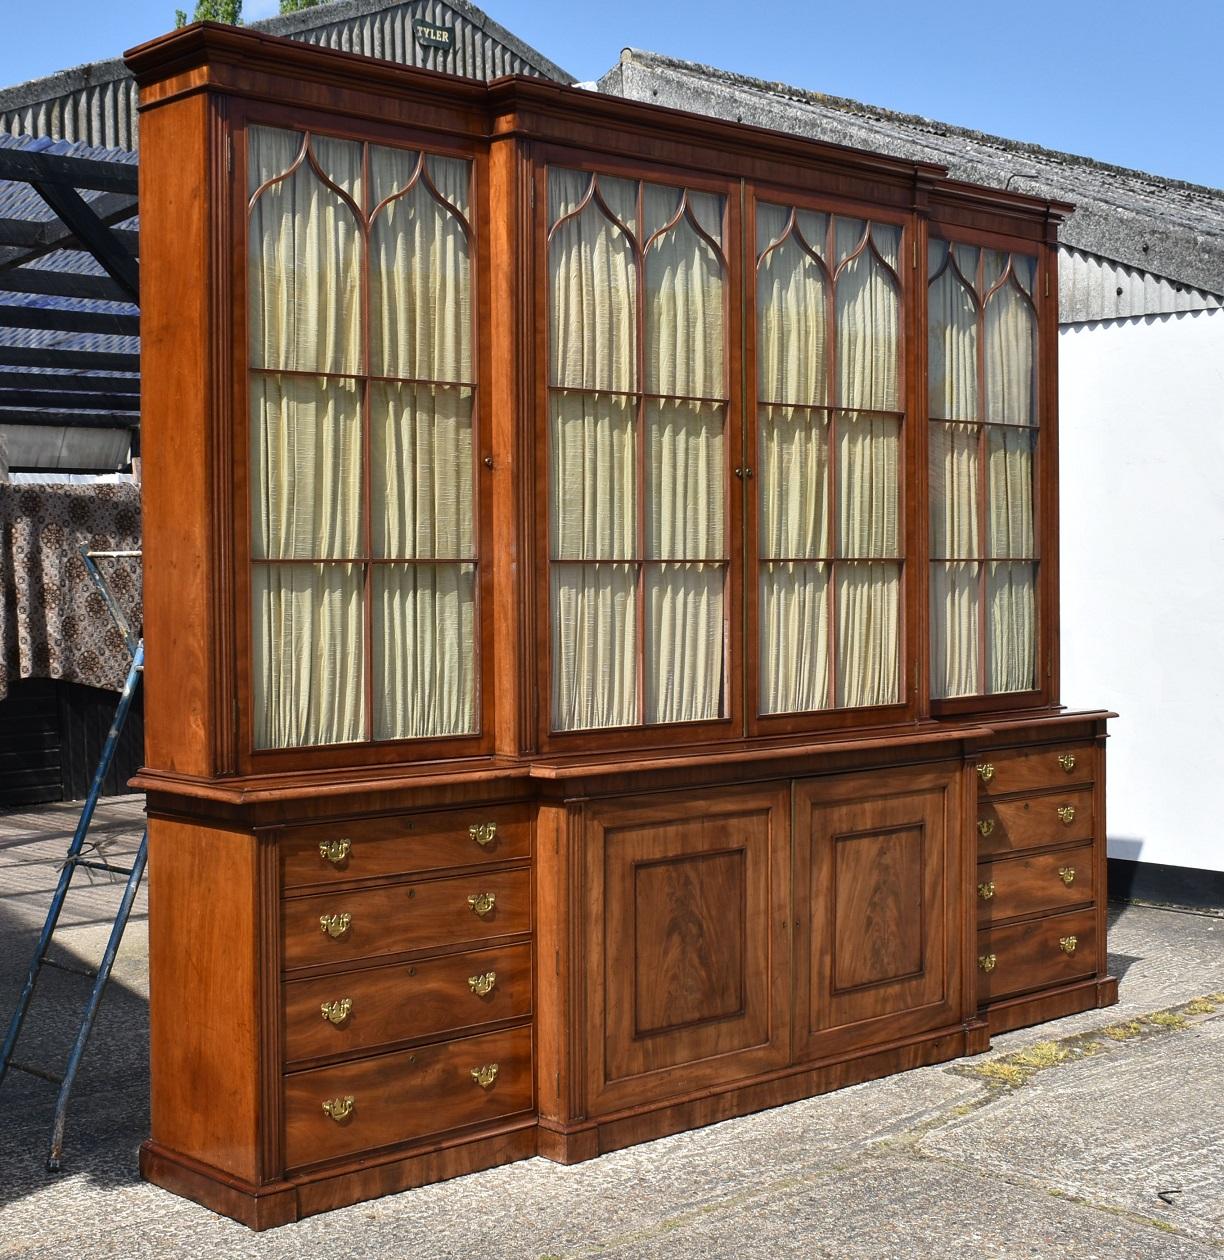 For sale is an impressive George III mahogany breakfront bookcase, attributed to Gillows, with a molded cornice over four large glazed doors, with arched astragals and fabric linings within. Each door is flanked by fluted columns above the base,